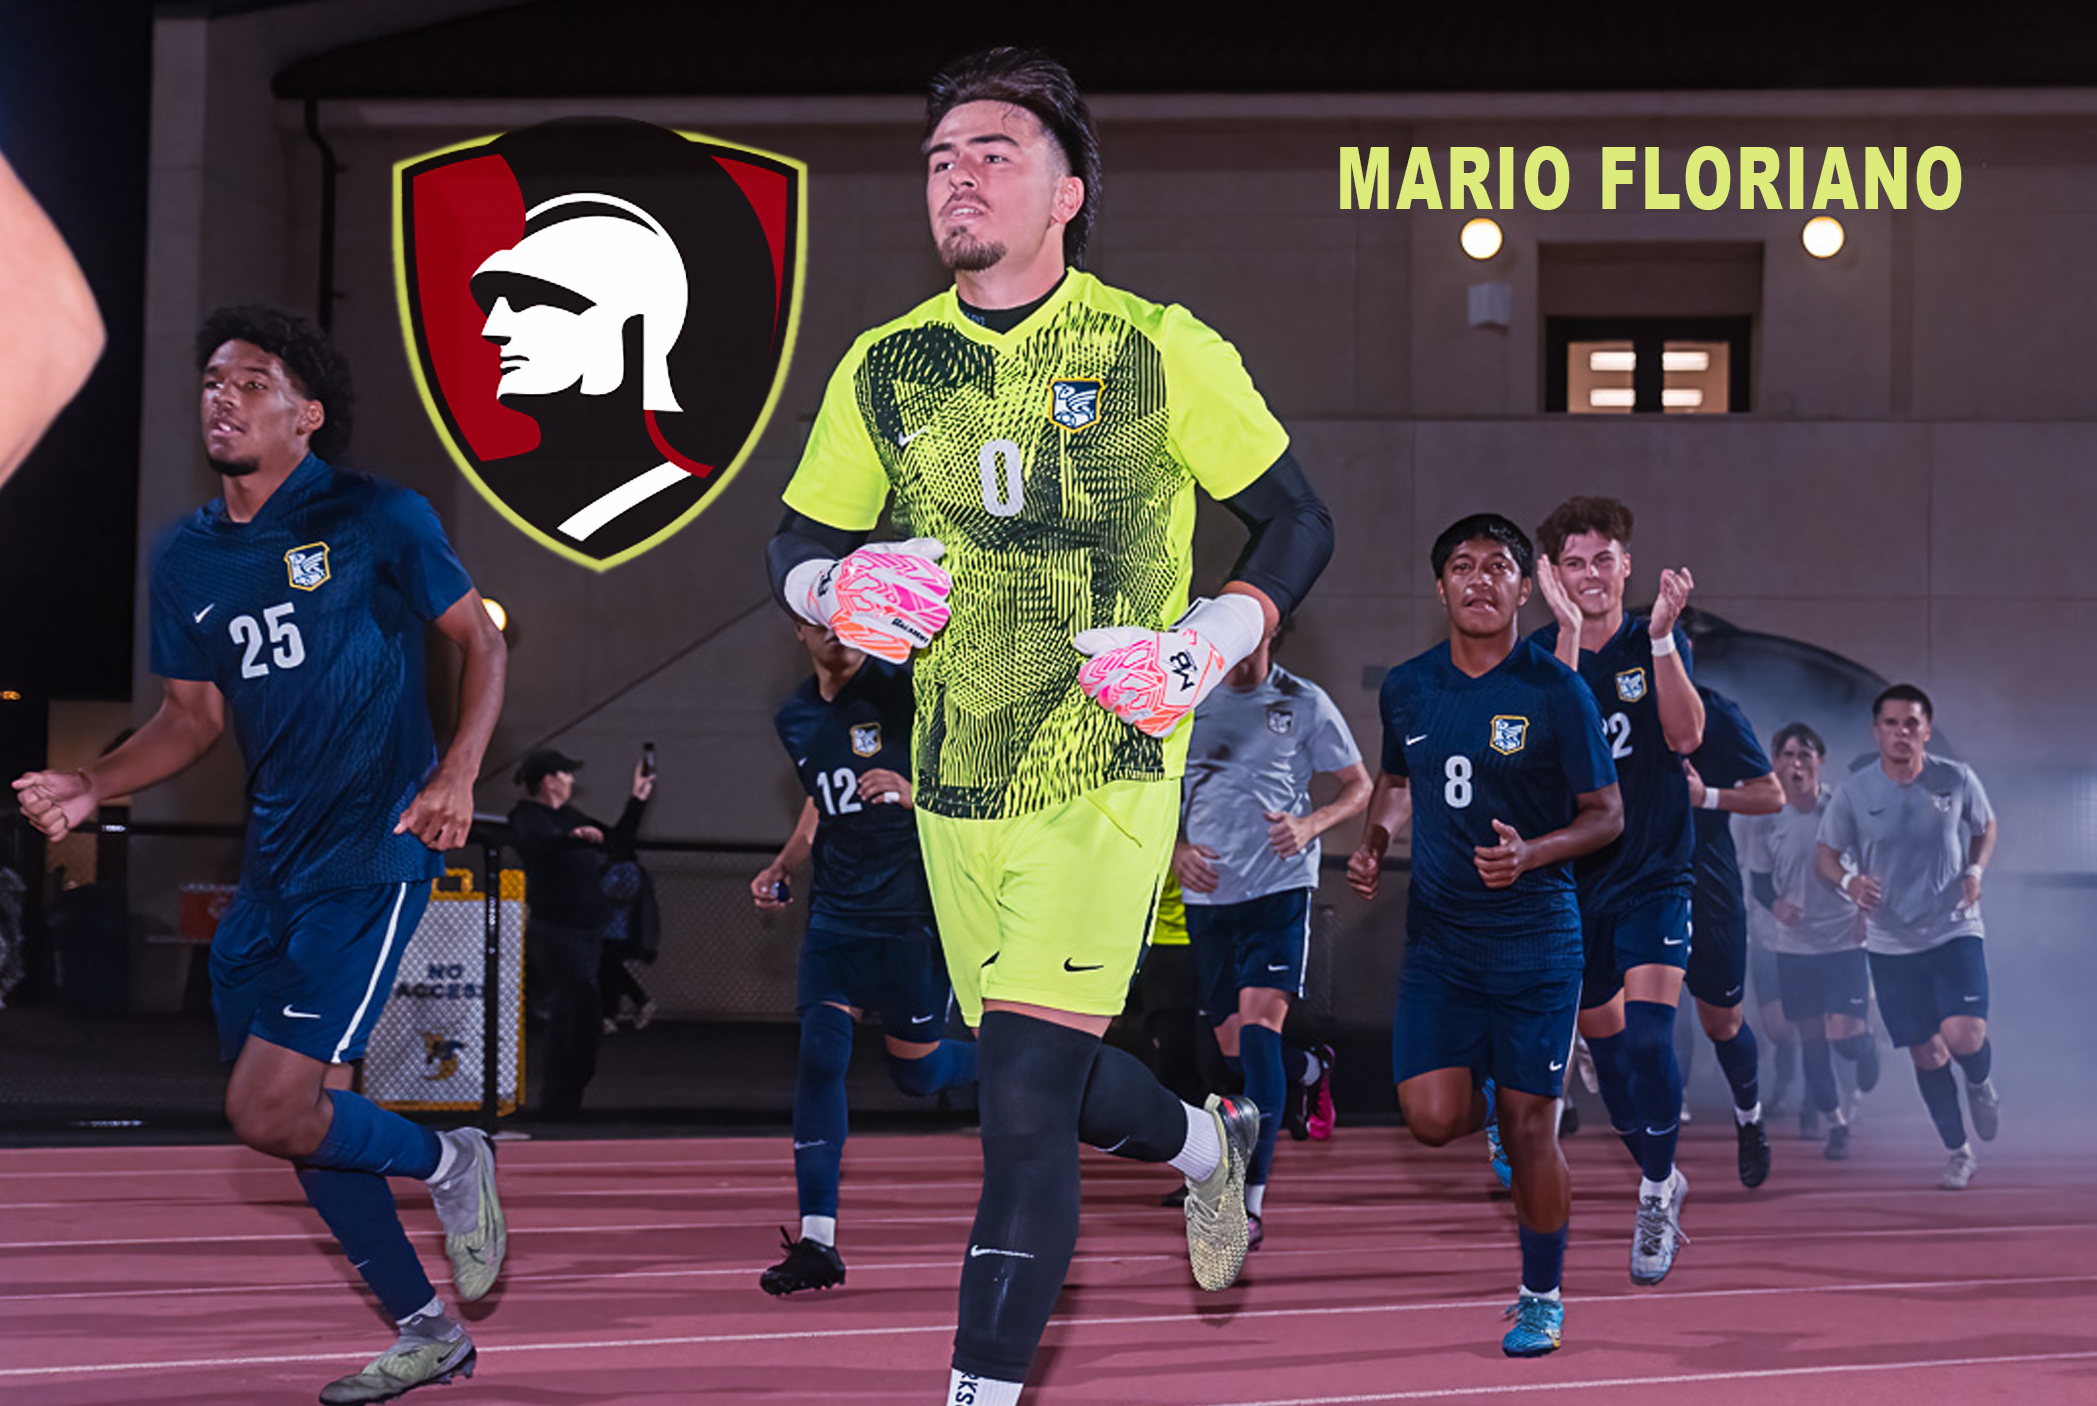 MARIO FLORIANO SIGNS WITH WESTMONT